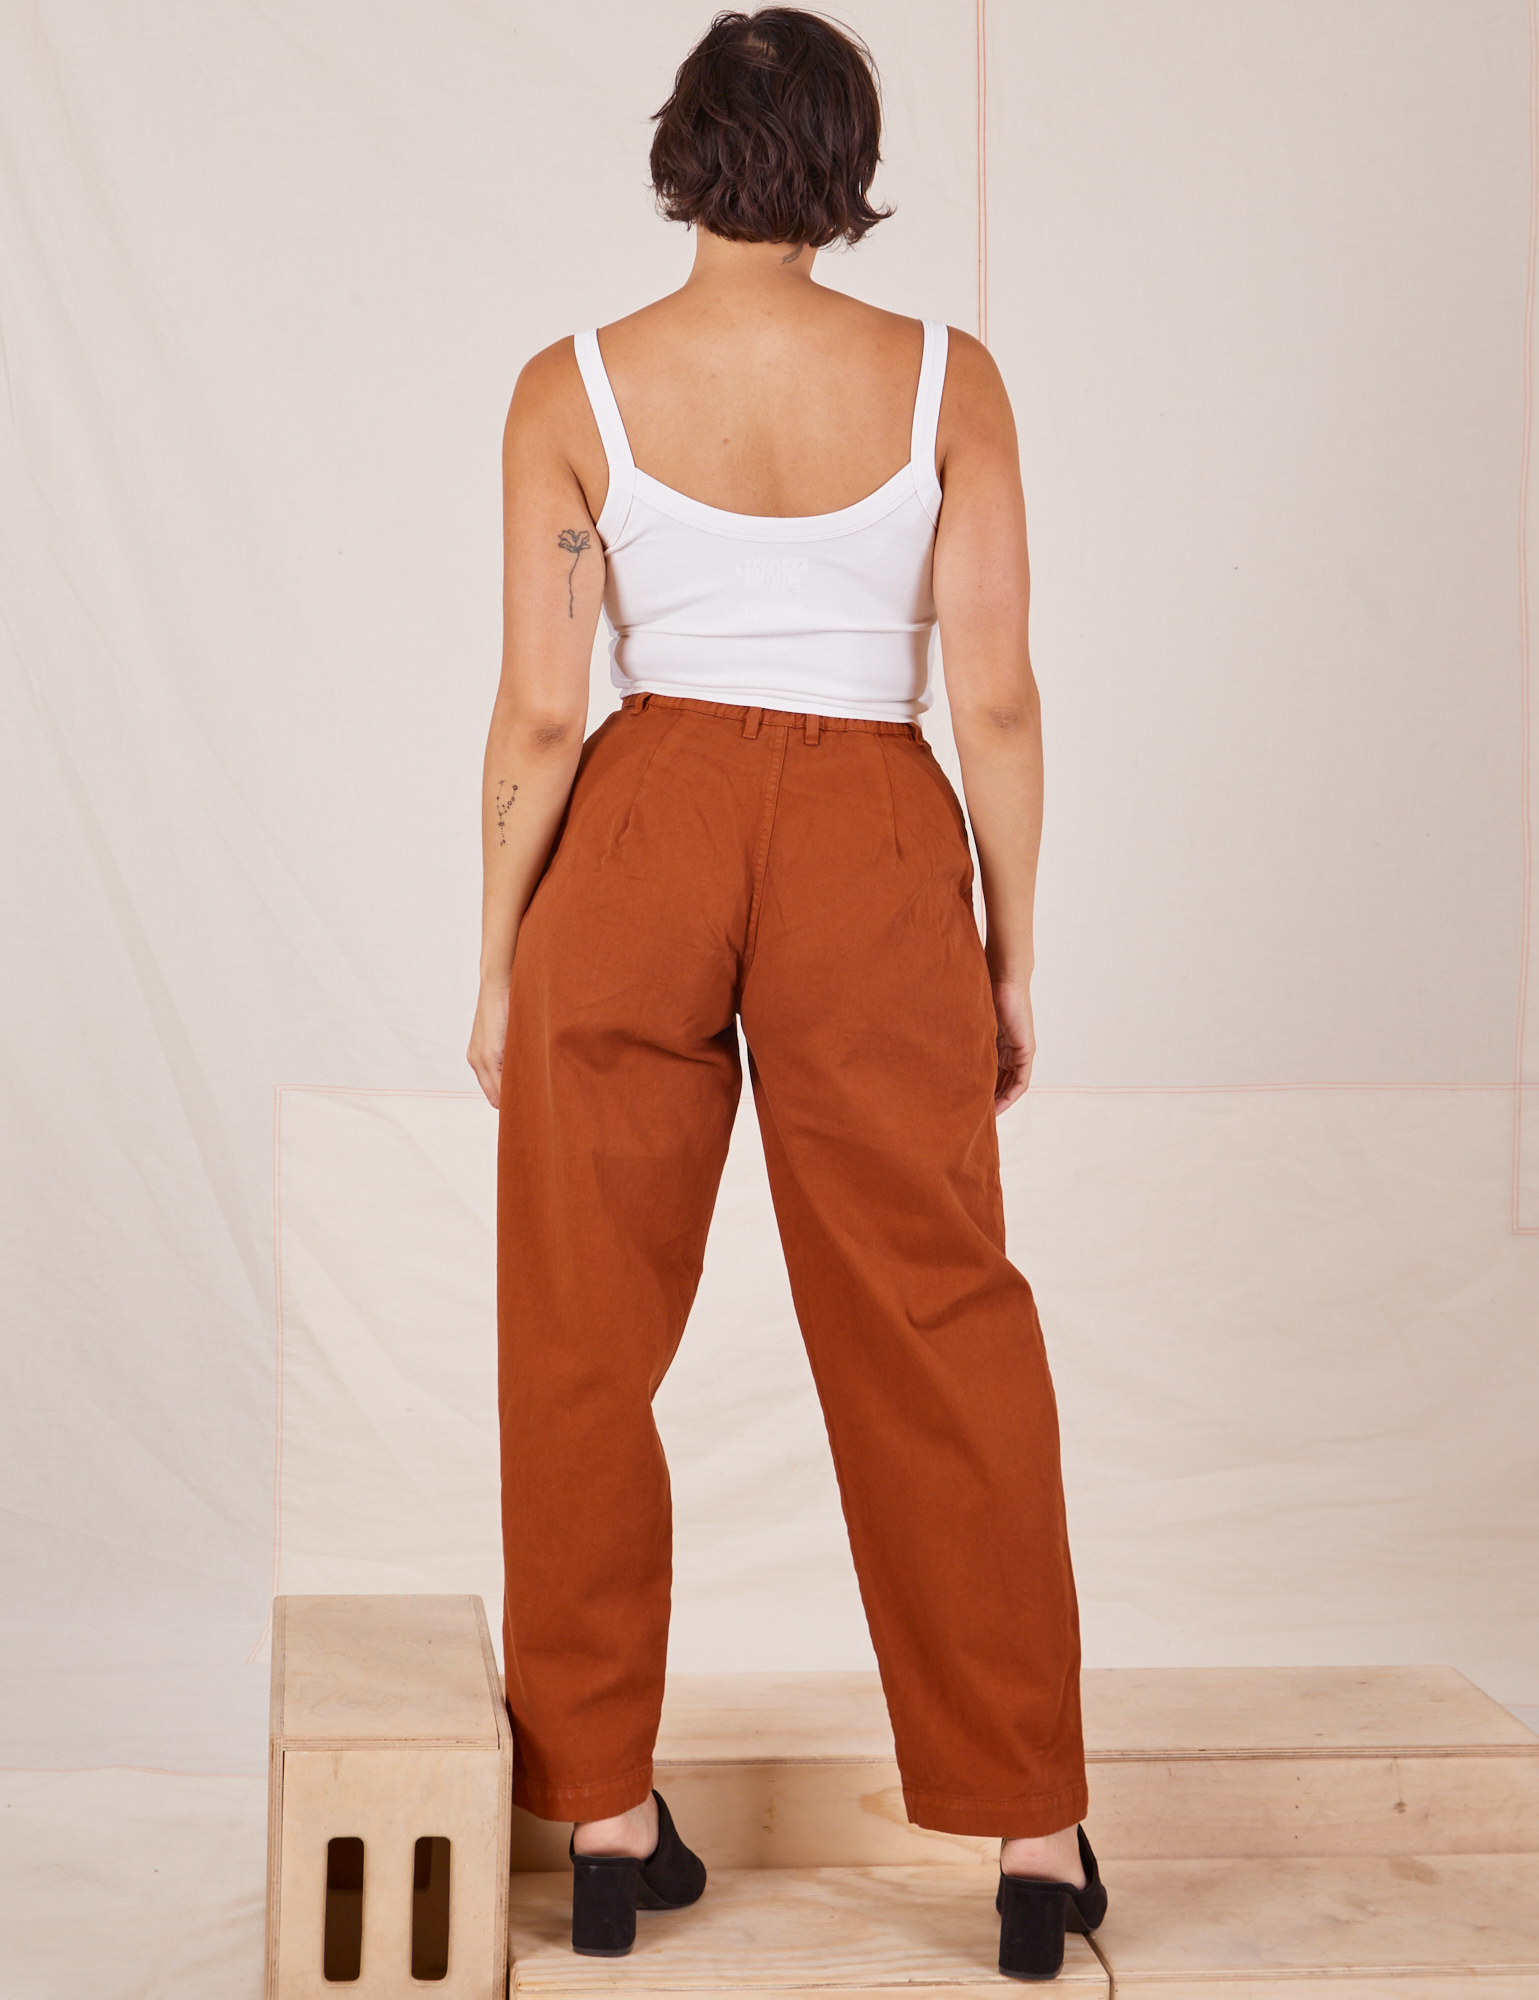 Back view of Heavyweight Trousers in Burnt Terracotta and Cropped Cami in vintage tee off-white by Tiara